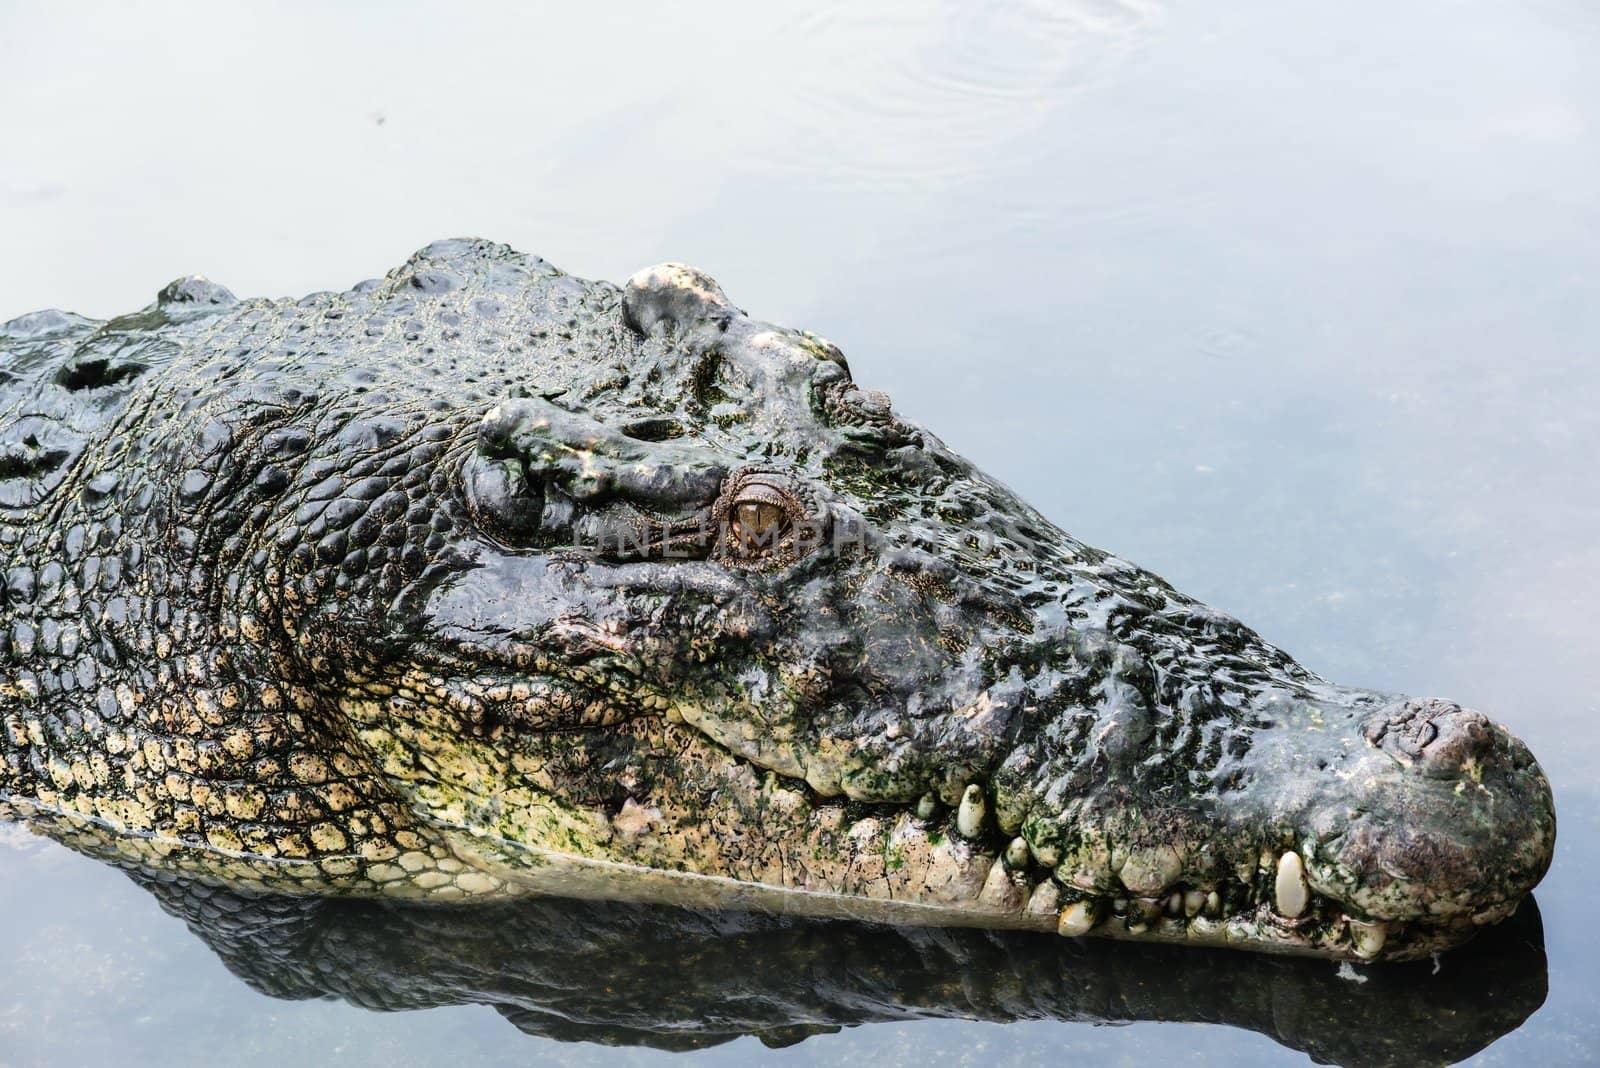 Large adult salt water crocodile in calm water close up, taken on a cloudy day 